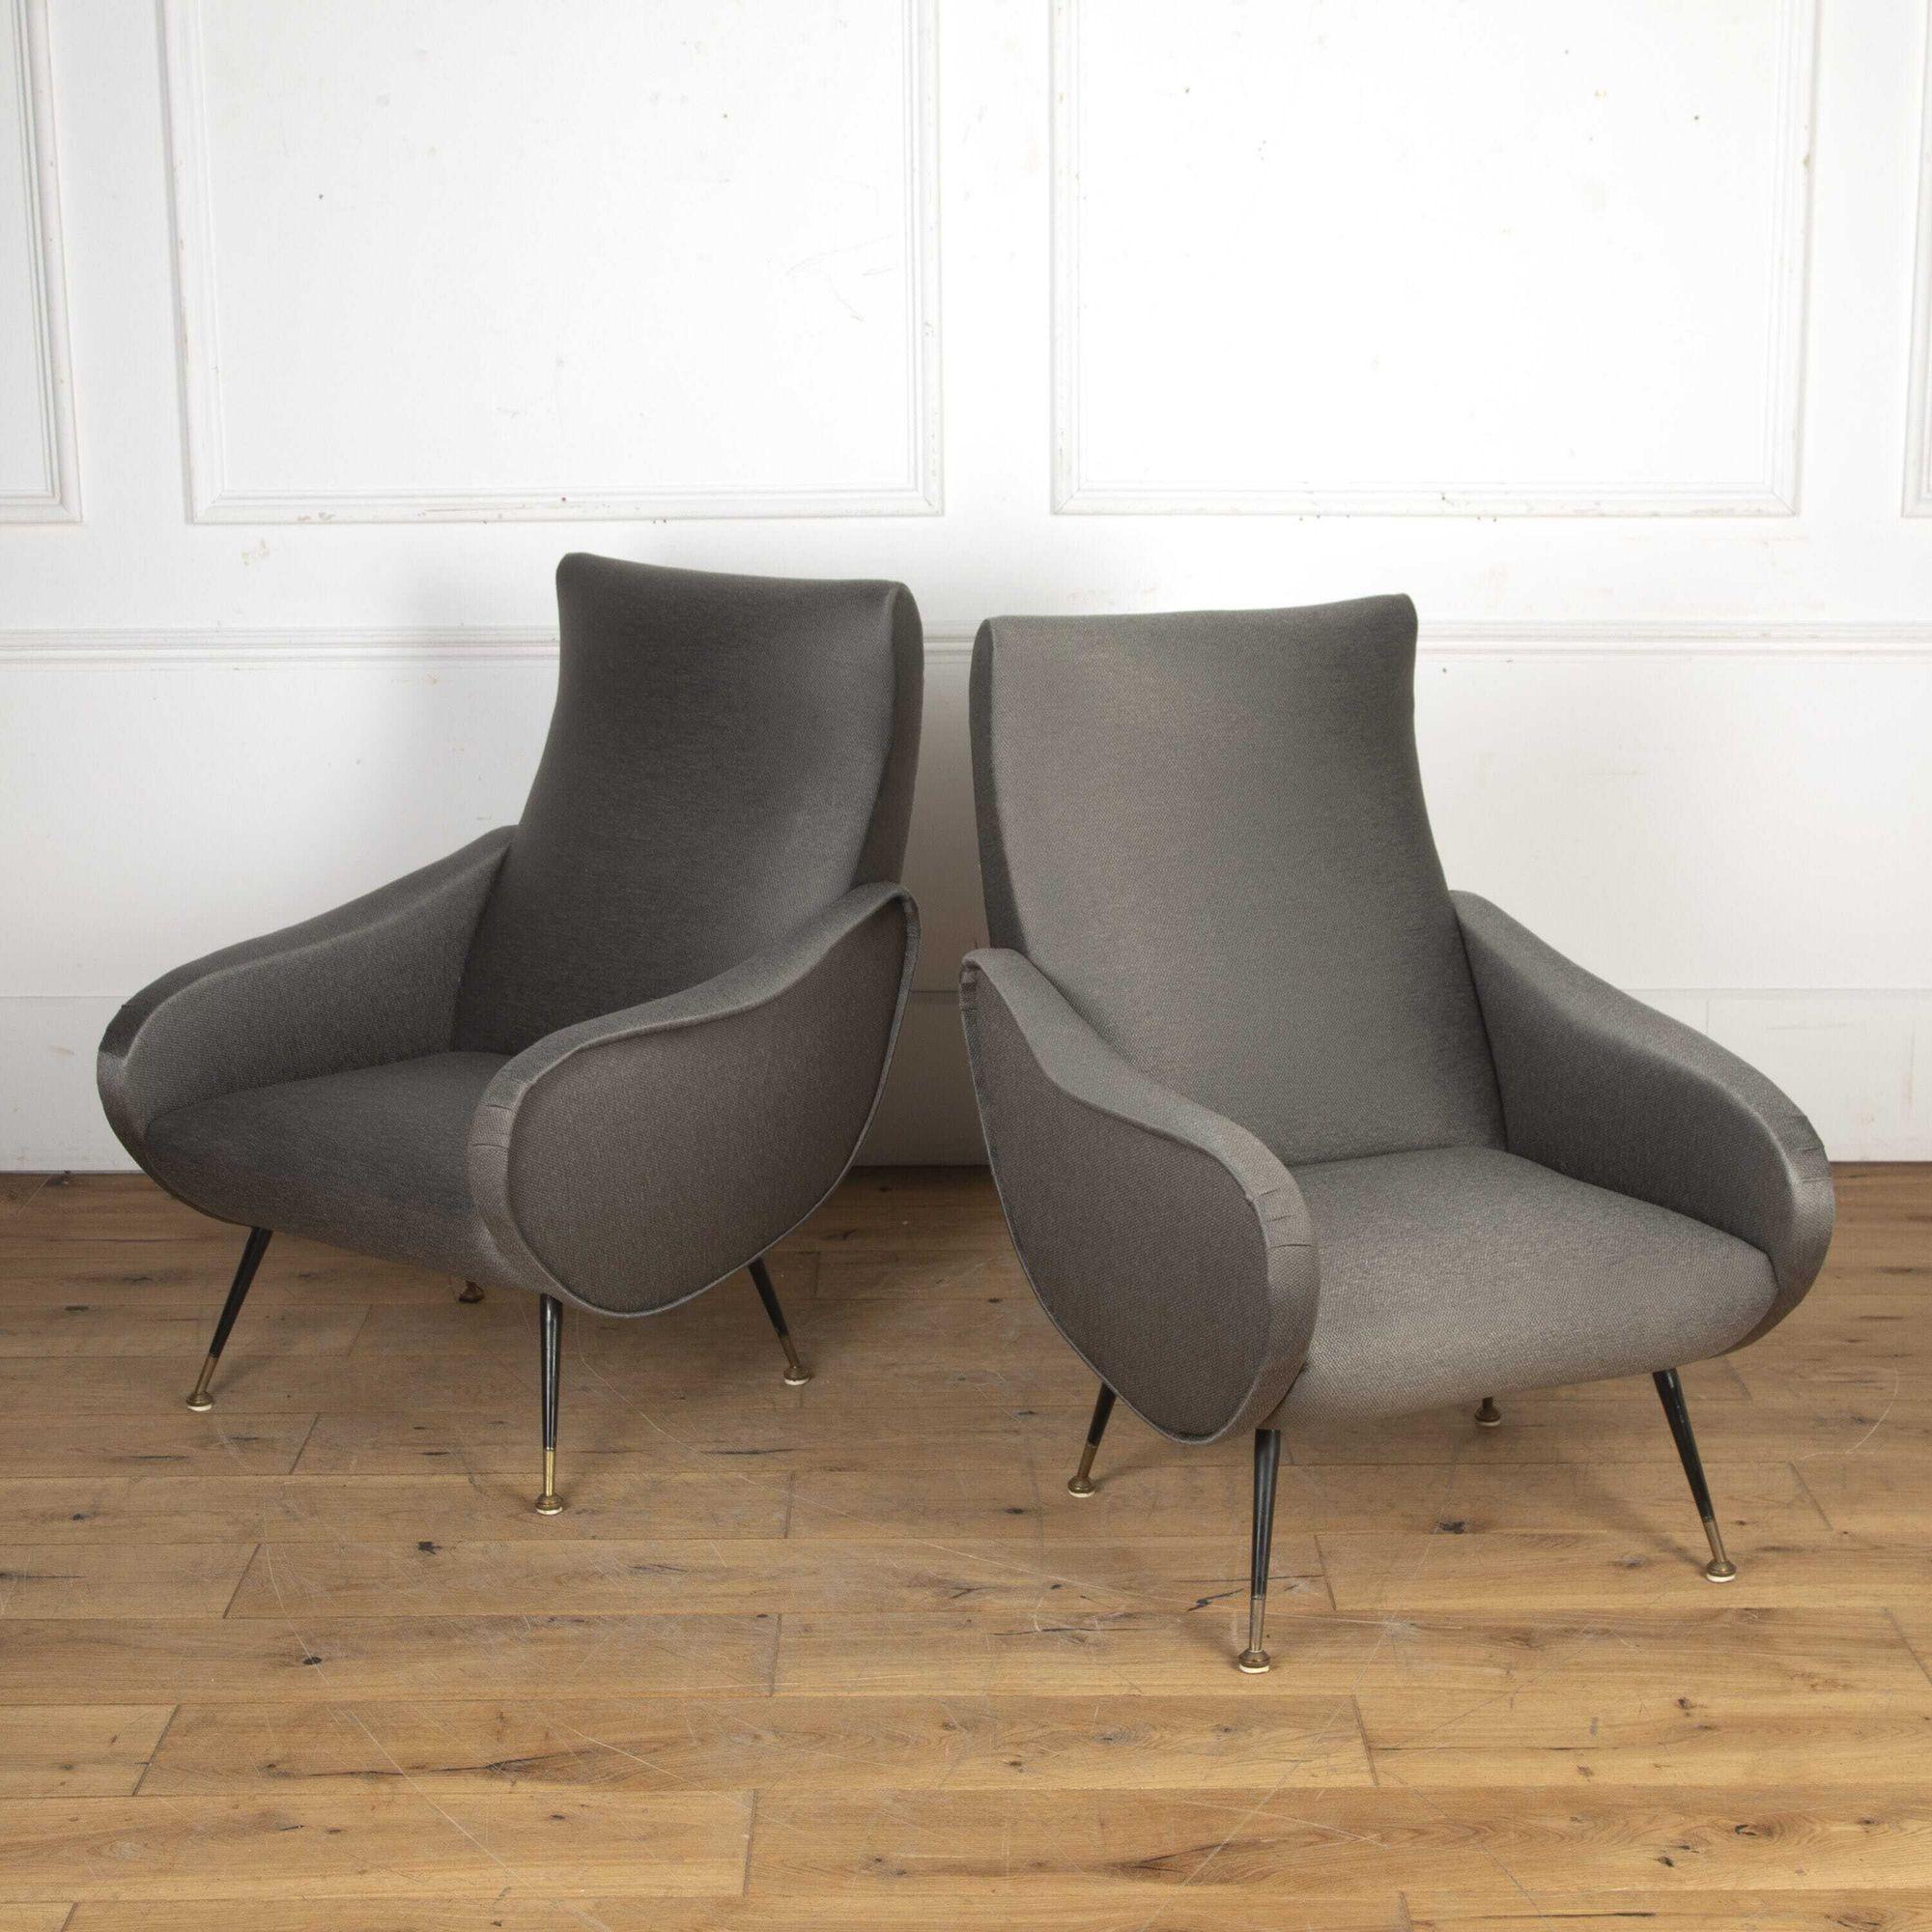 Pair of Italian midcentury armchairs in the style of Marco Zanuso.
This pair of chairs are in near immaculate condition, terminating on ebonized and brass feet and upholstered in a grey woven fabric.